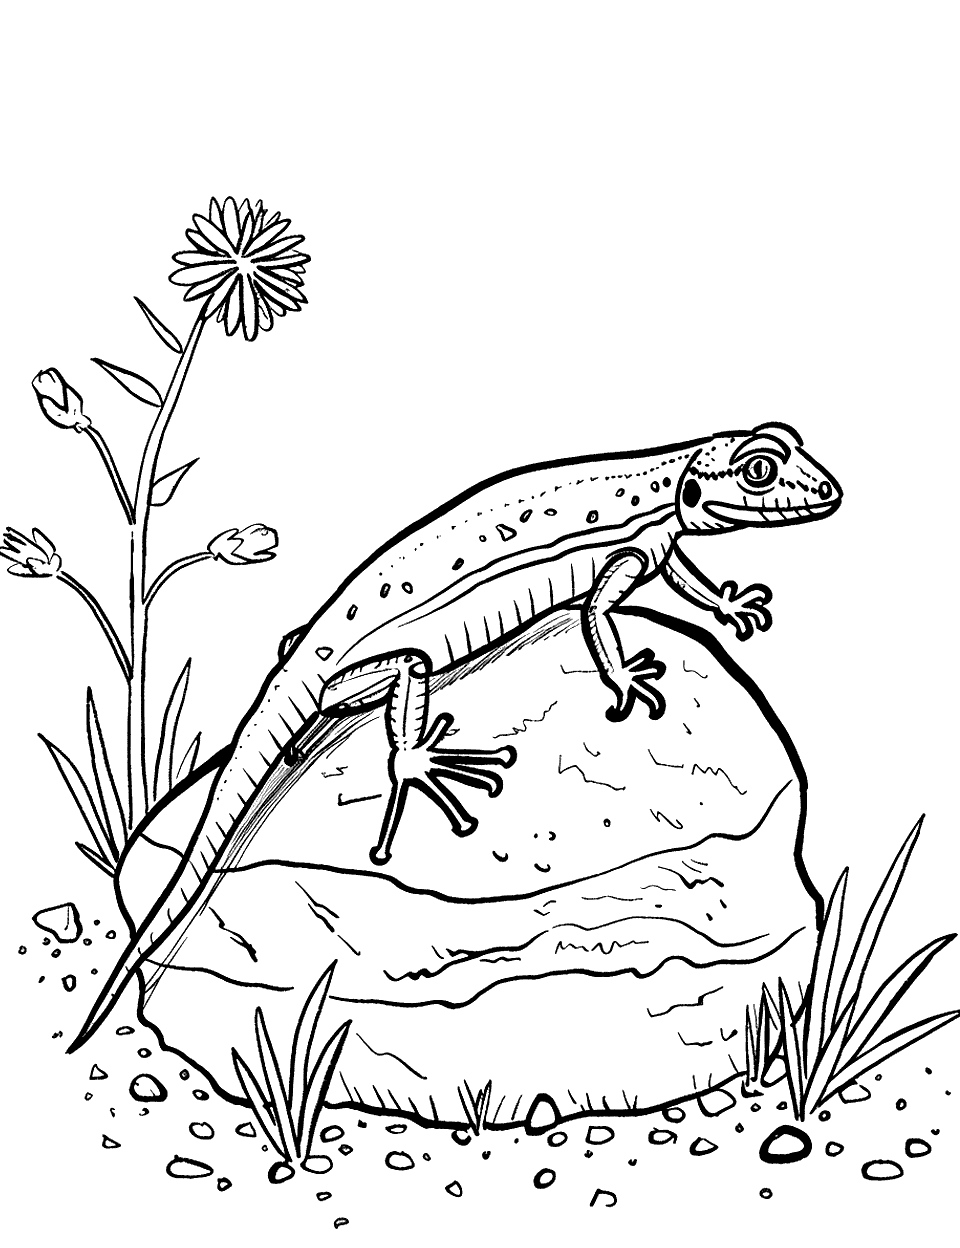 Lizard Basking on a Rock Insect Coloring Page - A lizard sunbathing on a warm rock in the garden.